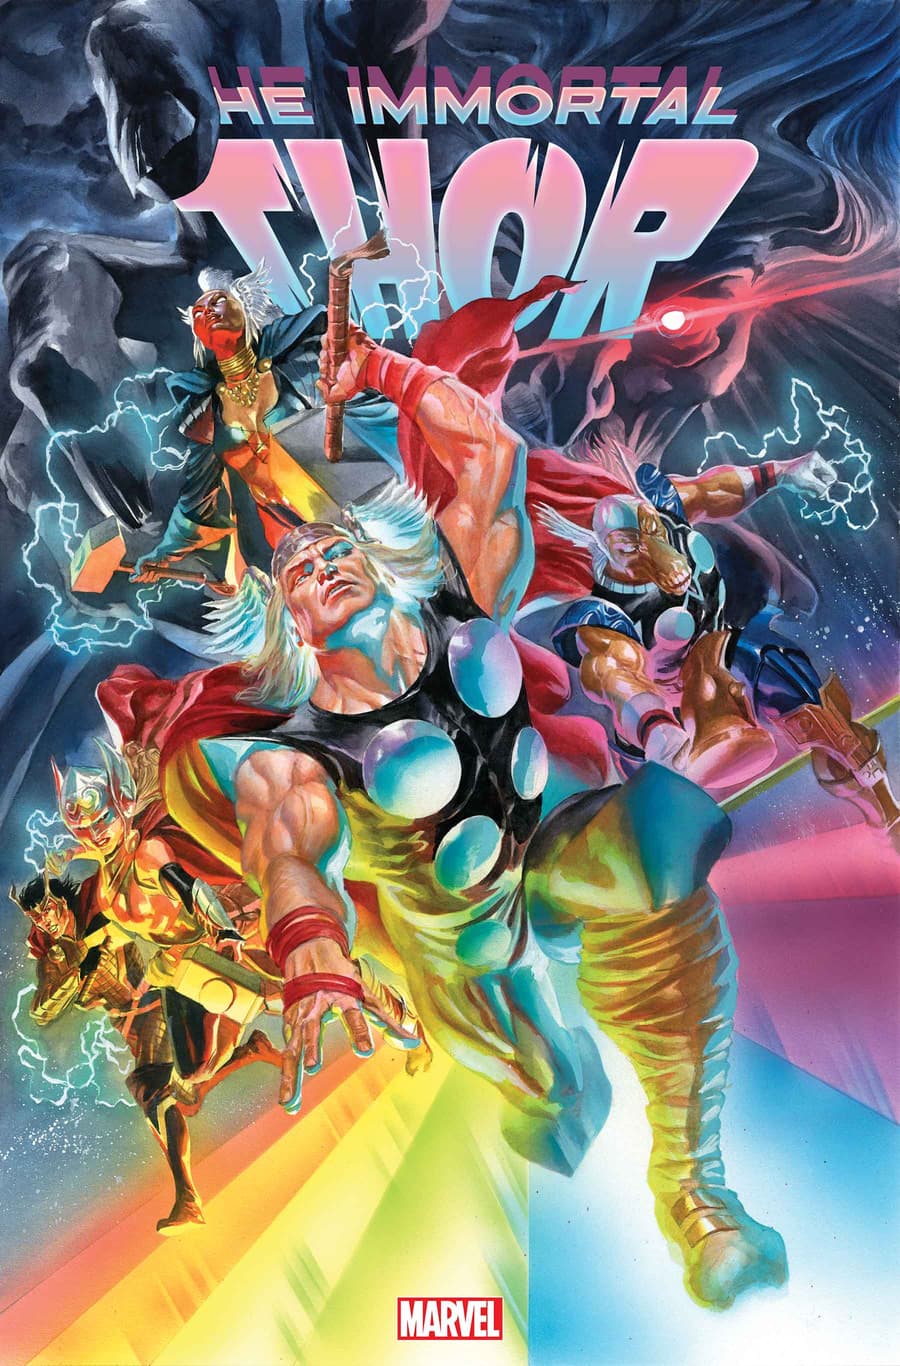 IMMORTAL THOR #5 cover by Alex Ross